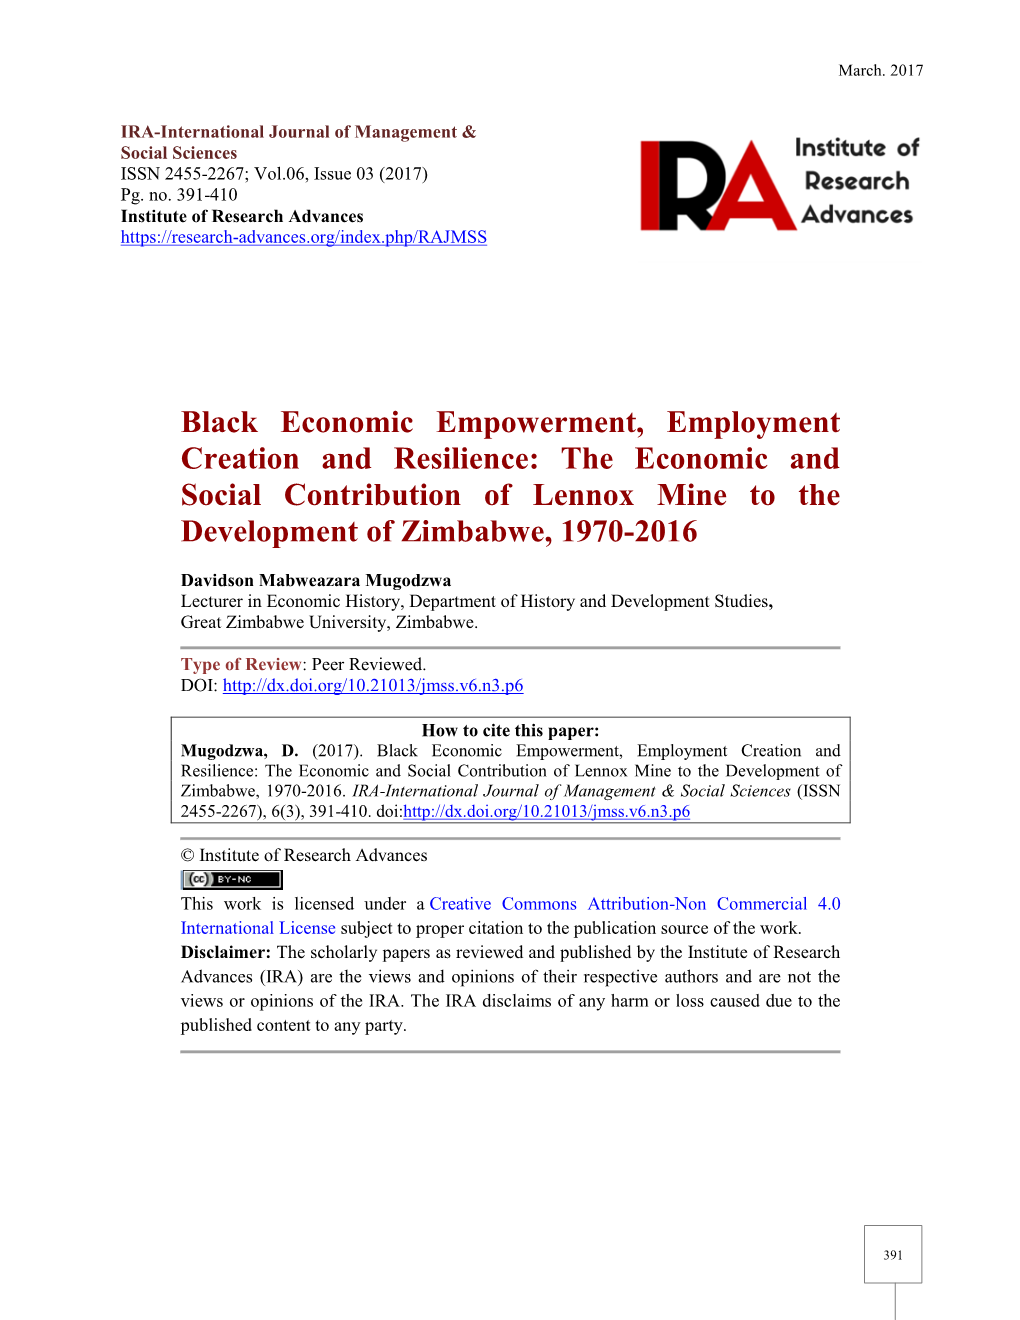 The Economic and Social Contribution of Lennox Mine to the Development of Zimbabwe, 1970-2016